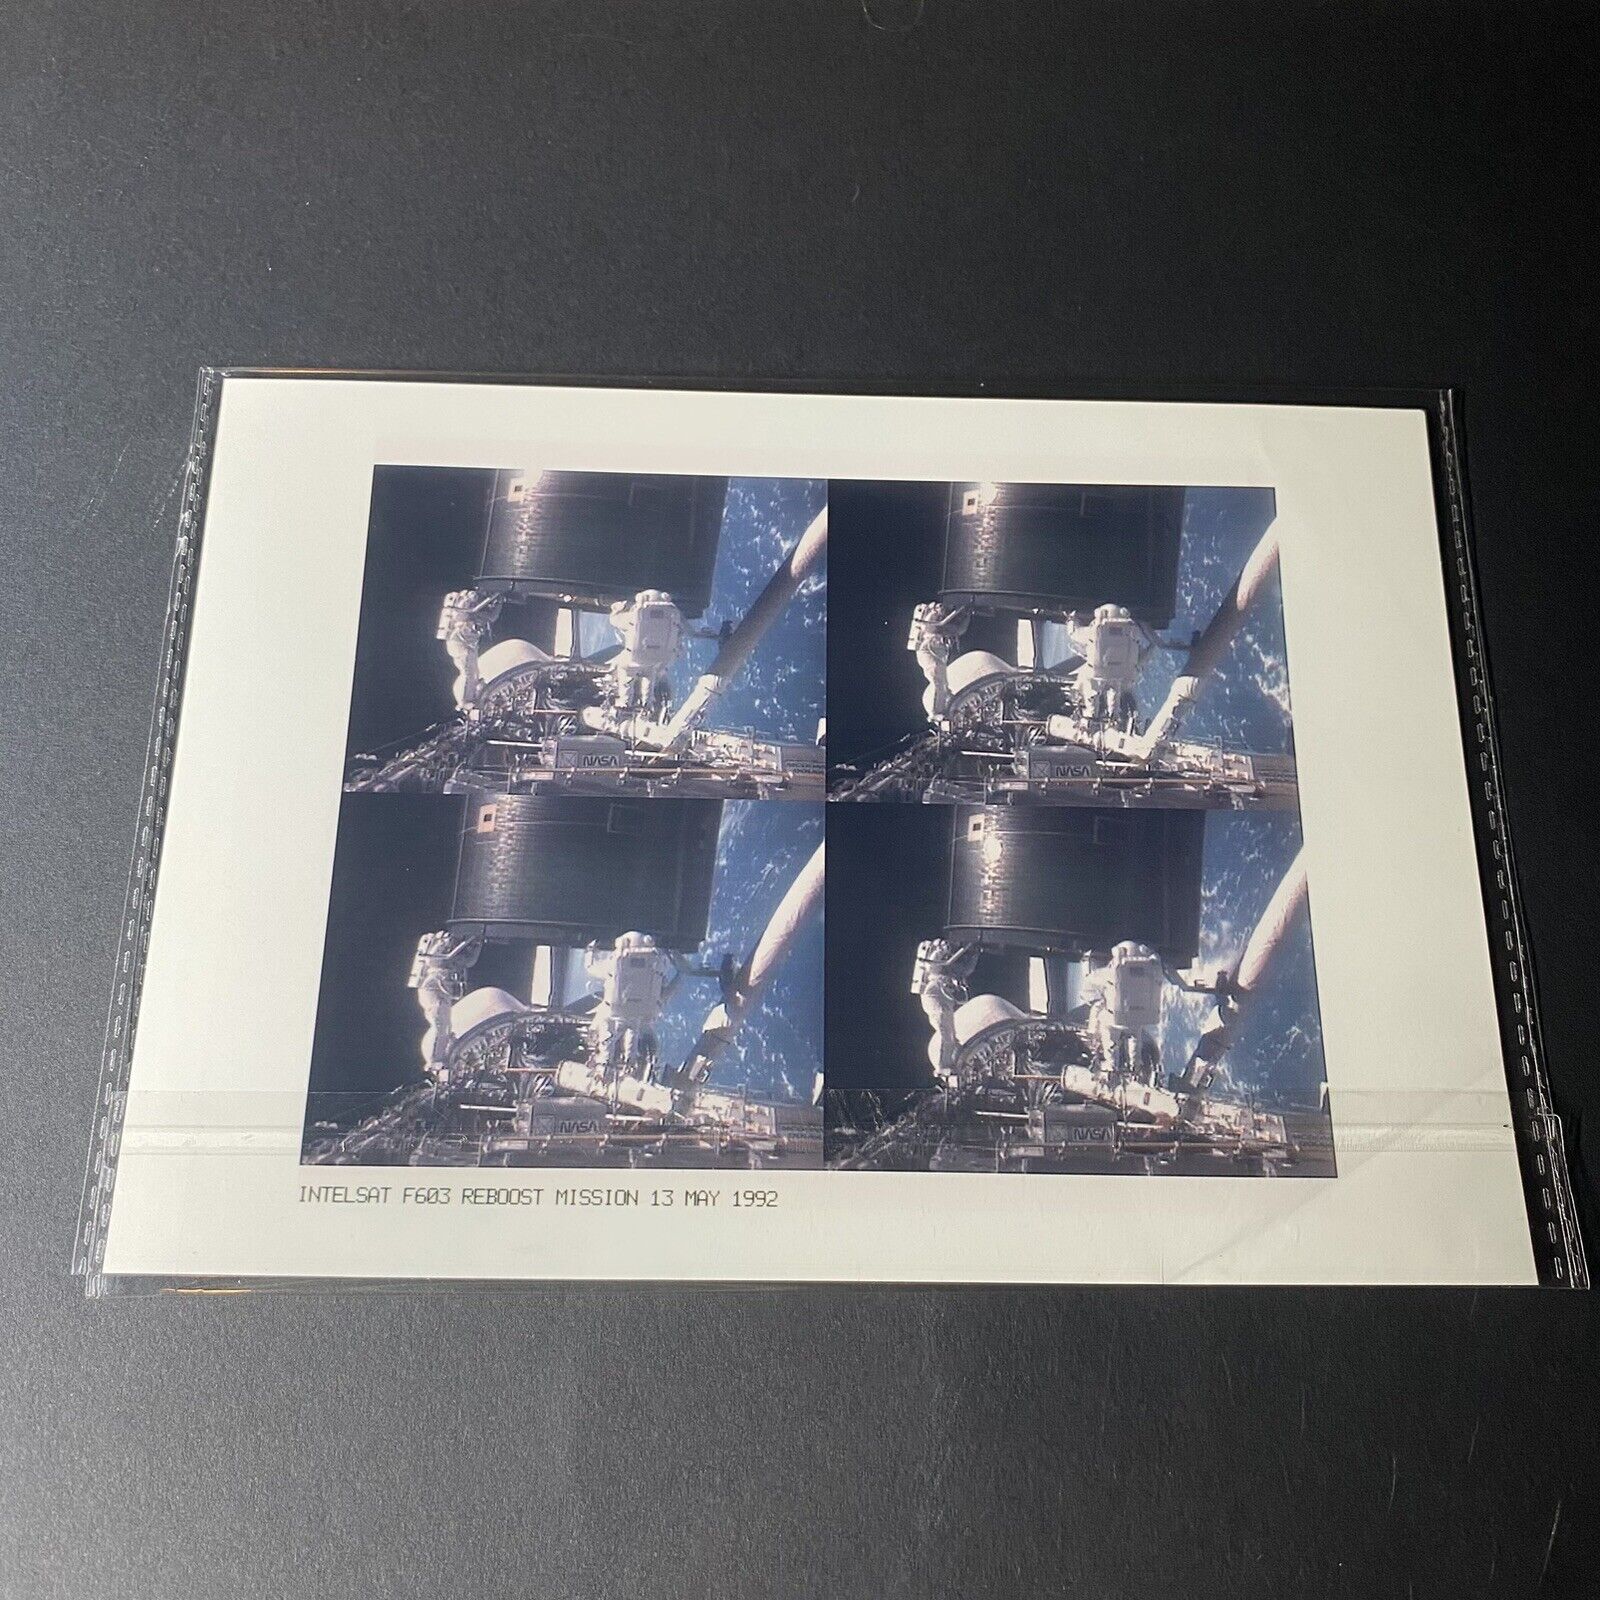 Vintage NASA Engineer 1992 Intelsat Space Shuttle STS-49 Mission 8x6 Photograph